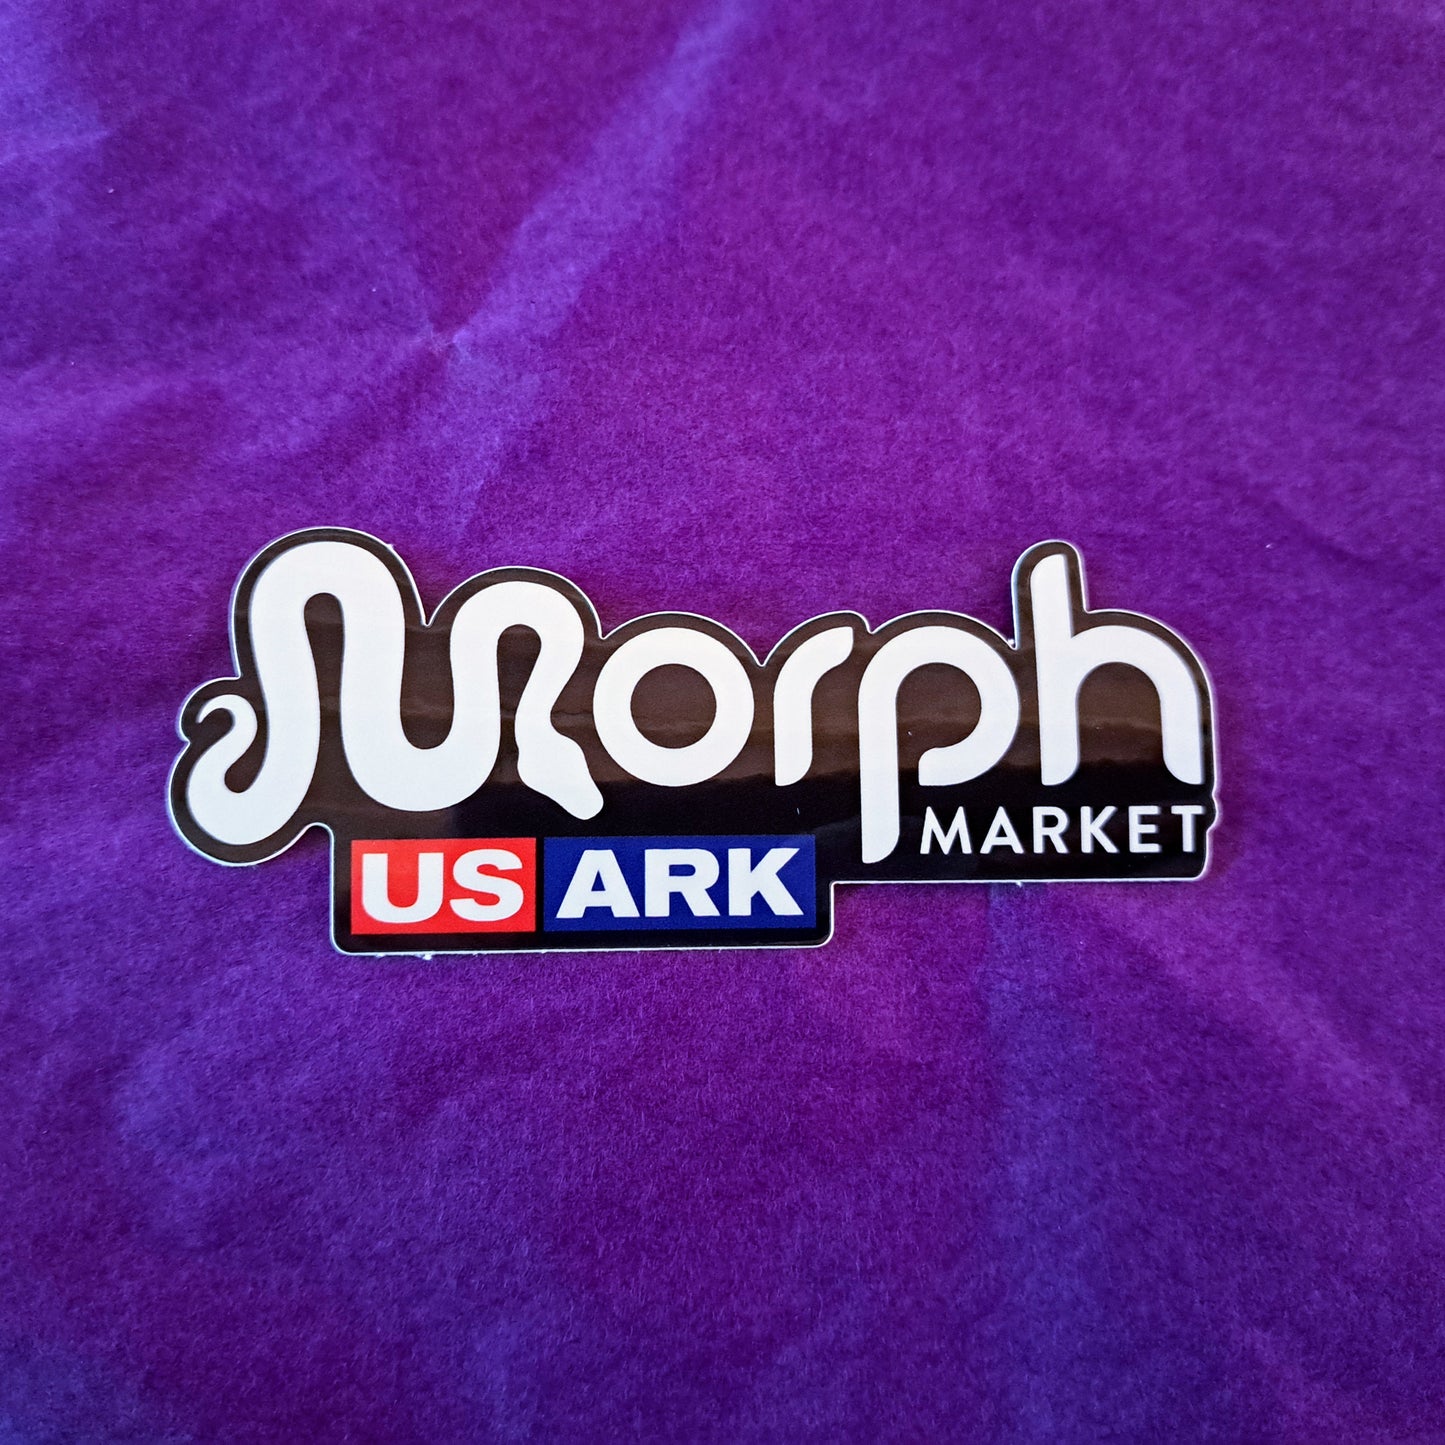 MorphMarket USARK sticker - FREE WITH ANY PURCHASE